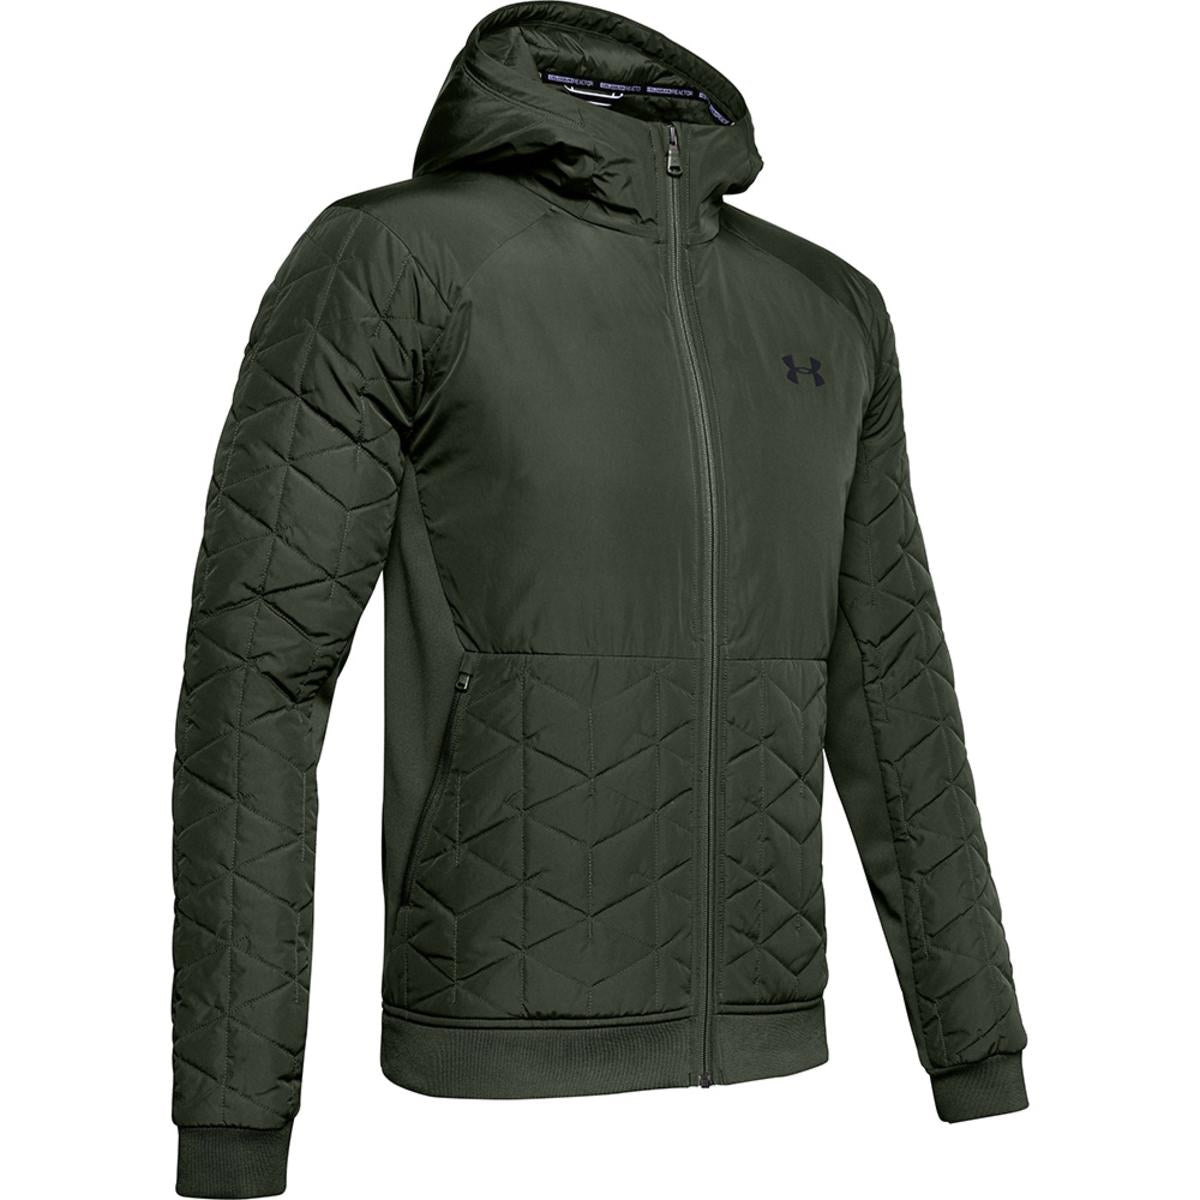 Under Armour Men's ColdGear Infrared Shield Jacket – Adventure Outfitter